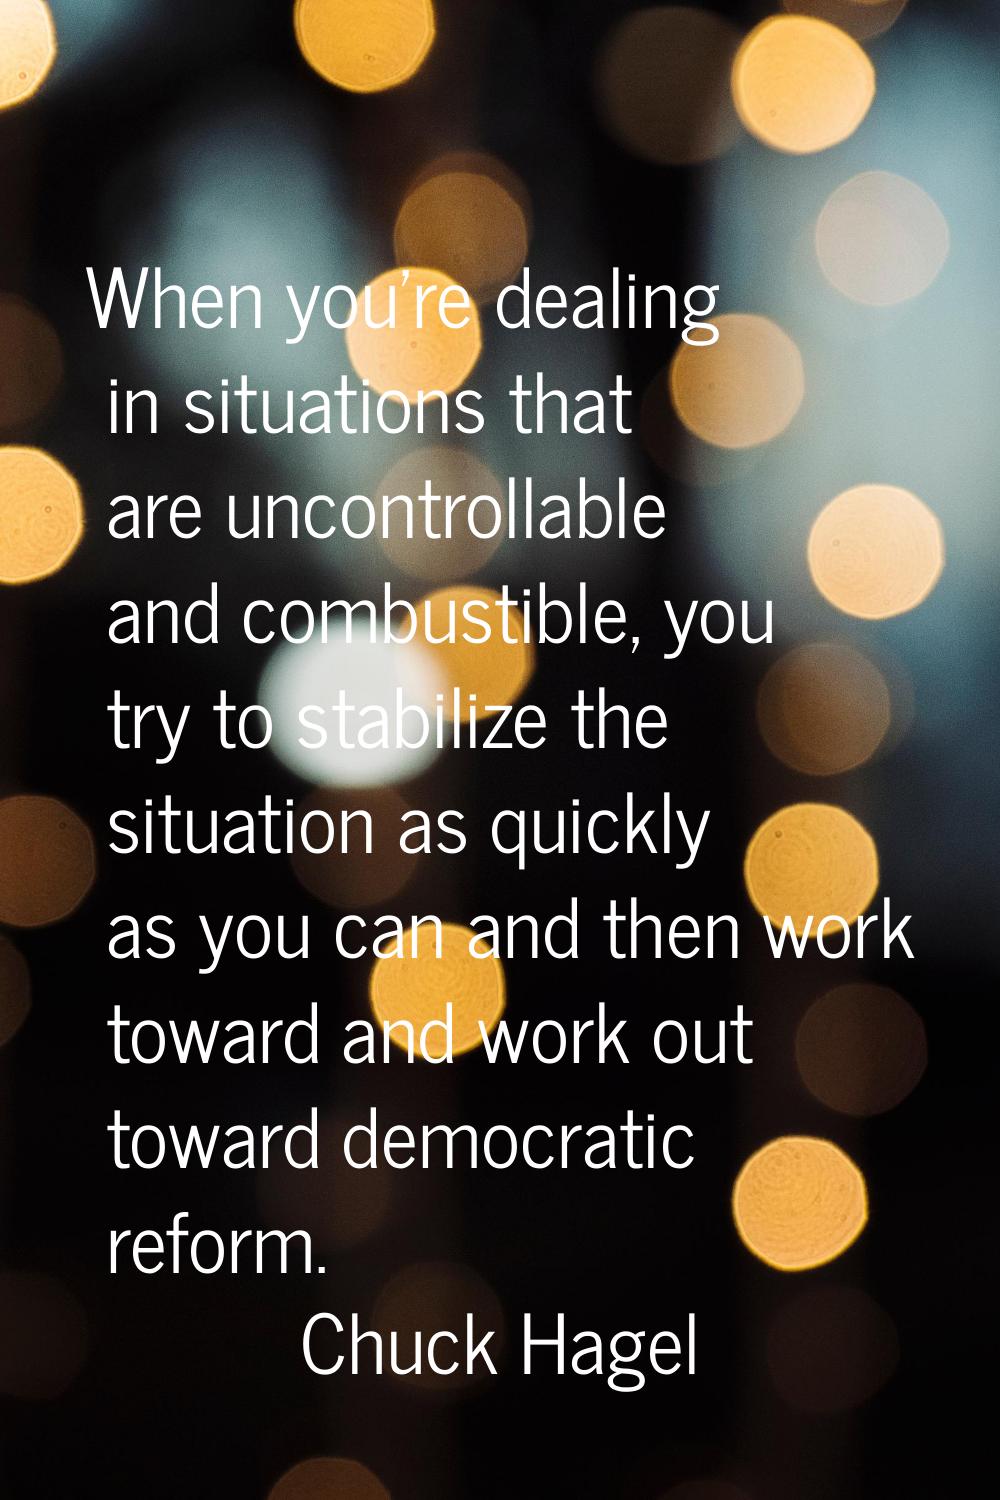 When you're dealing in situations that are uncontrollable and combustible, you try to stabilize the